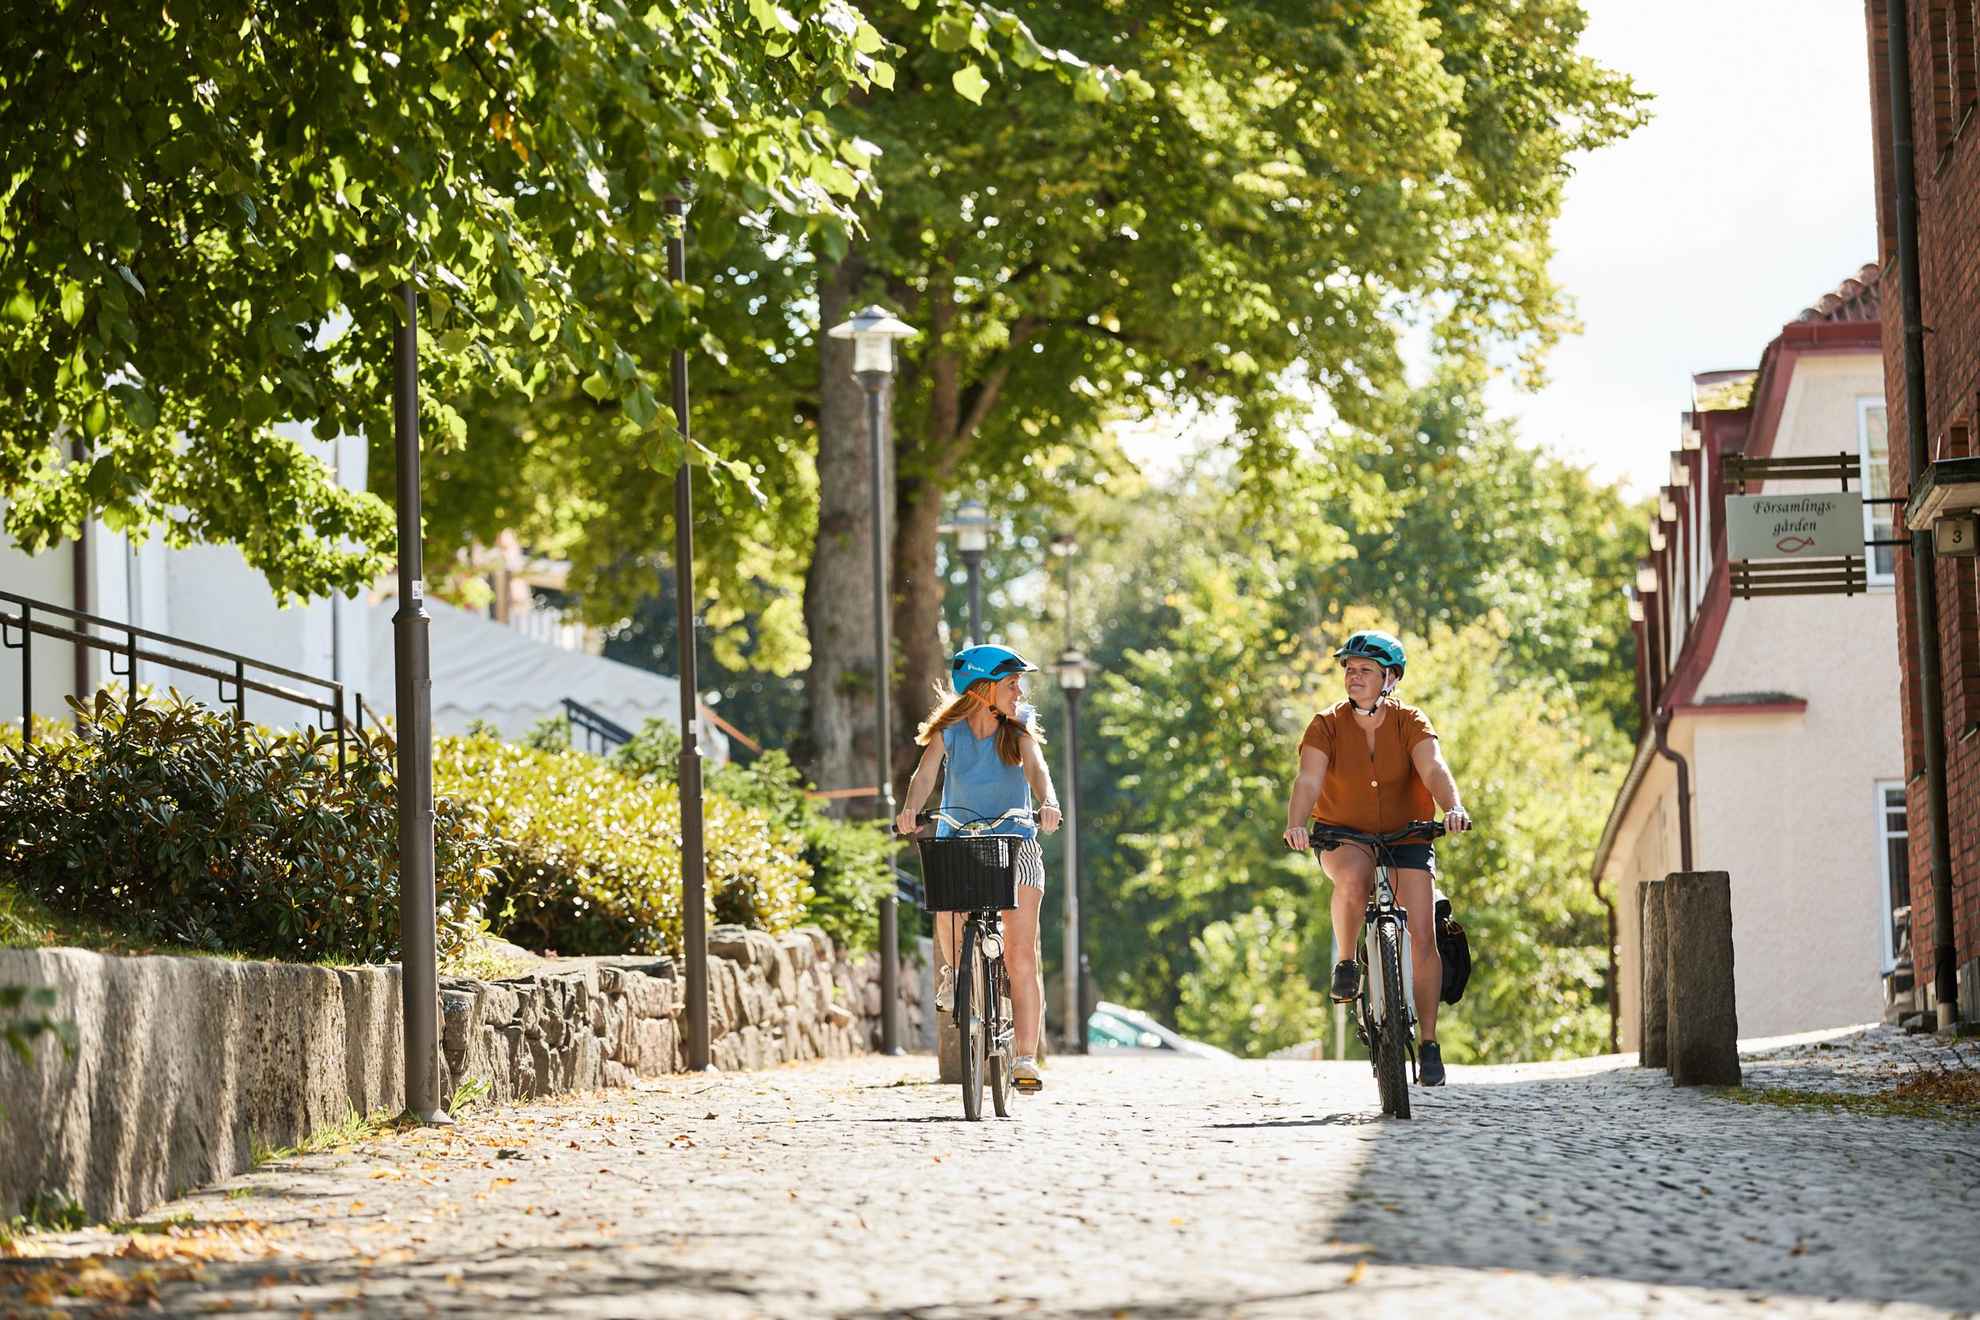 Two women are biking on a small cobblestone street. Houses and greenery along the street.